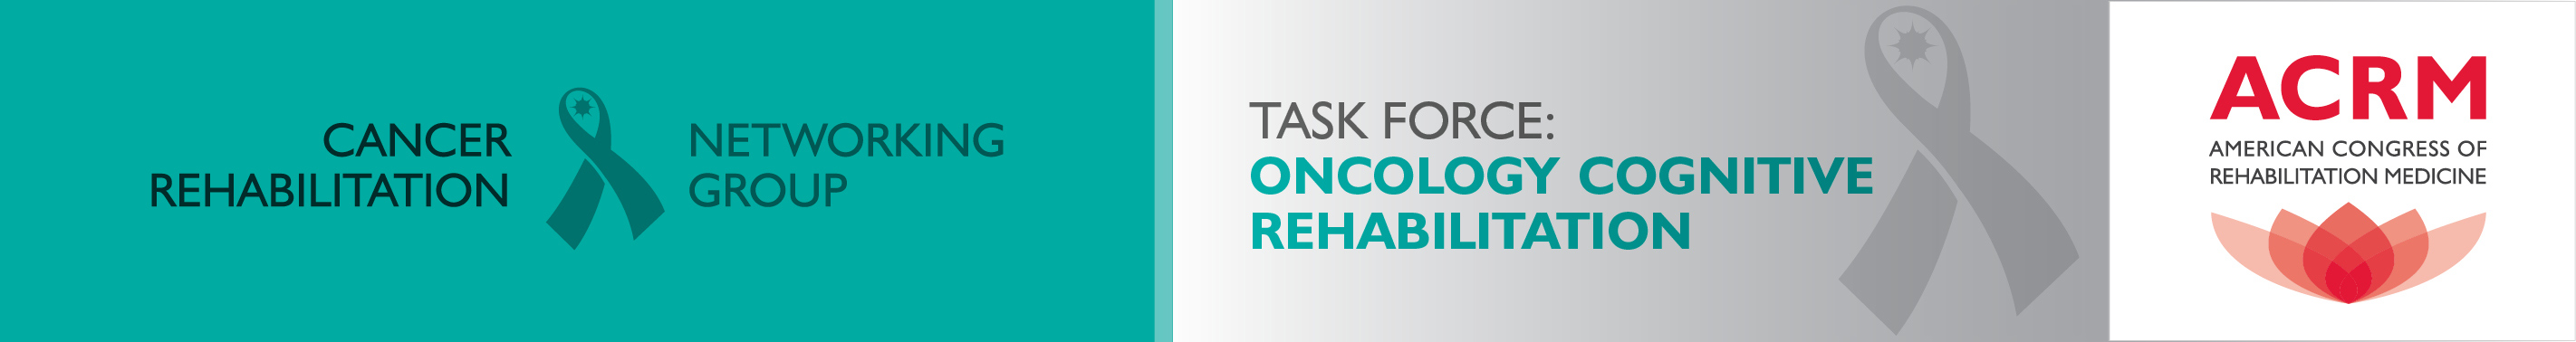 ACRM Cancer Rehabilitation Networking Group Oncology Task Force header